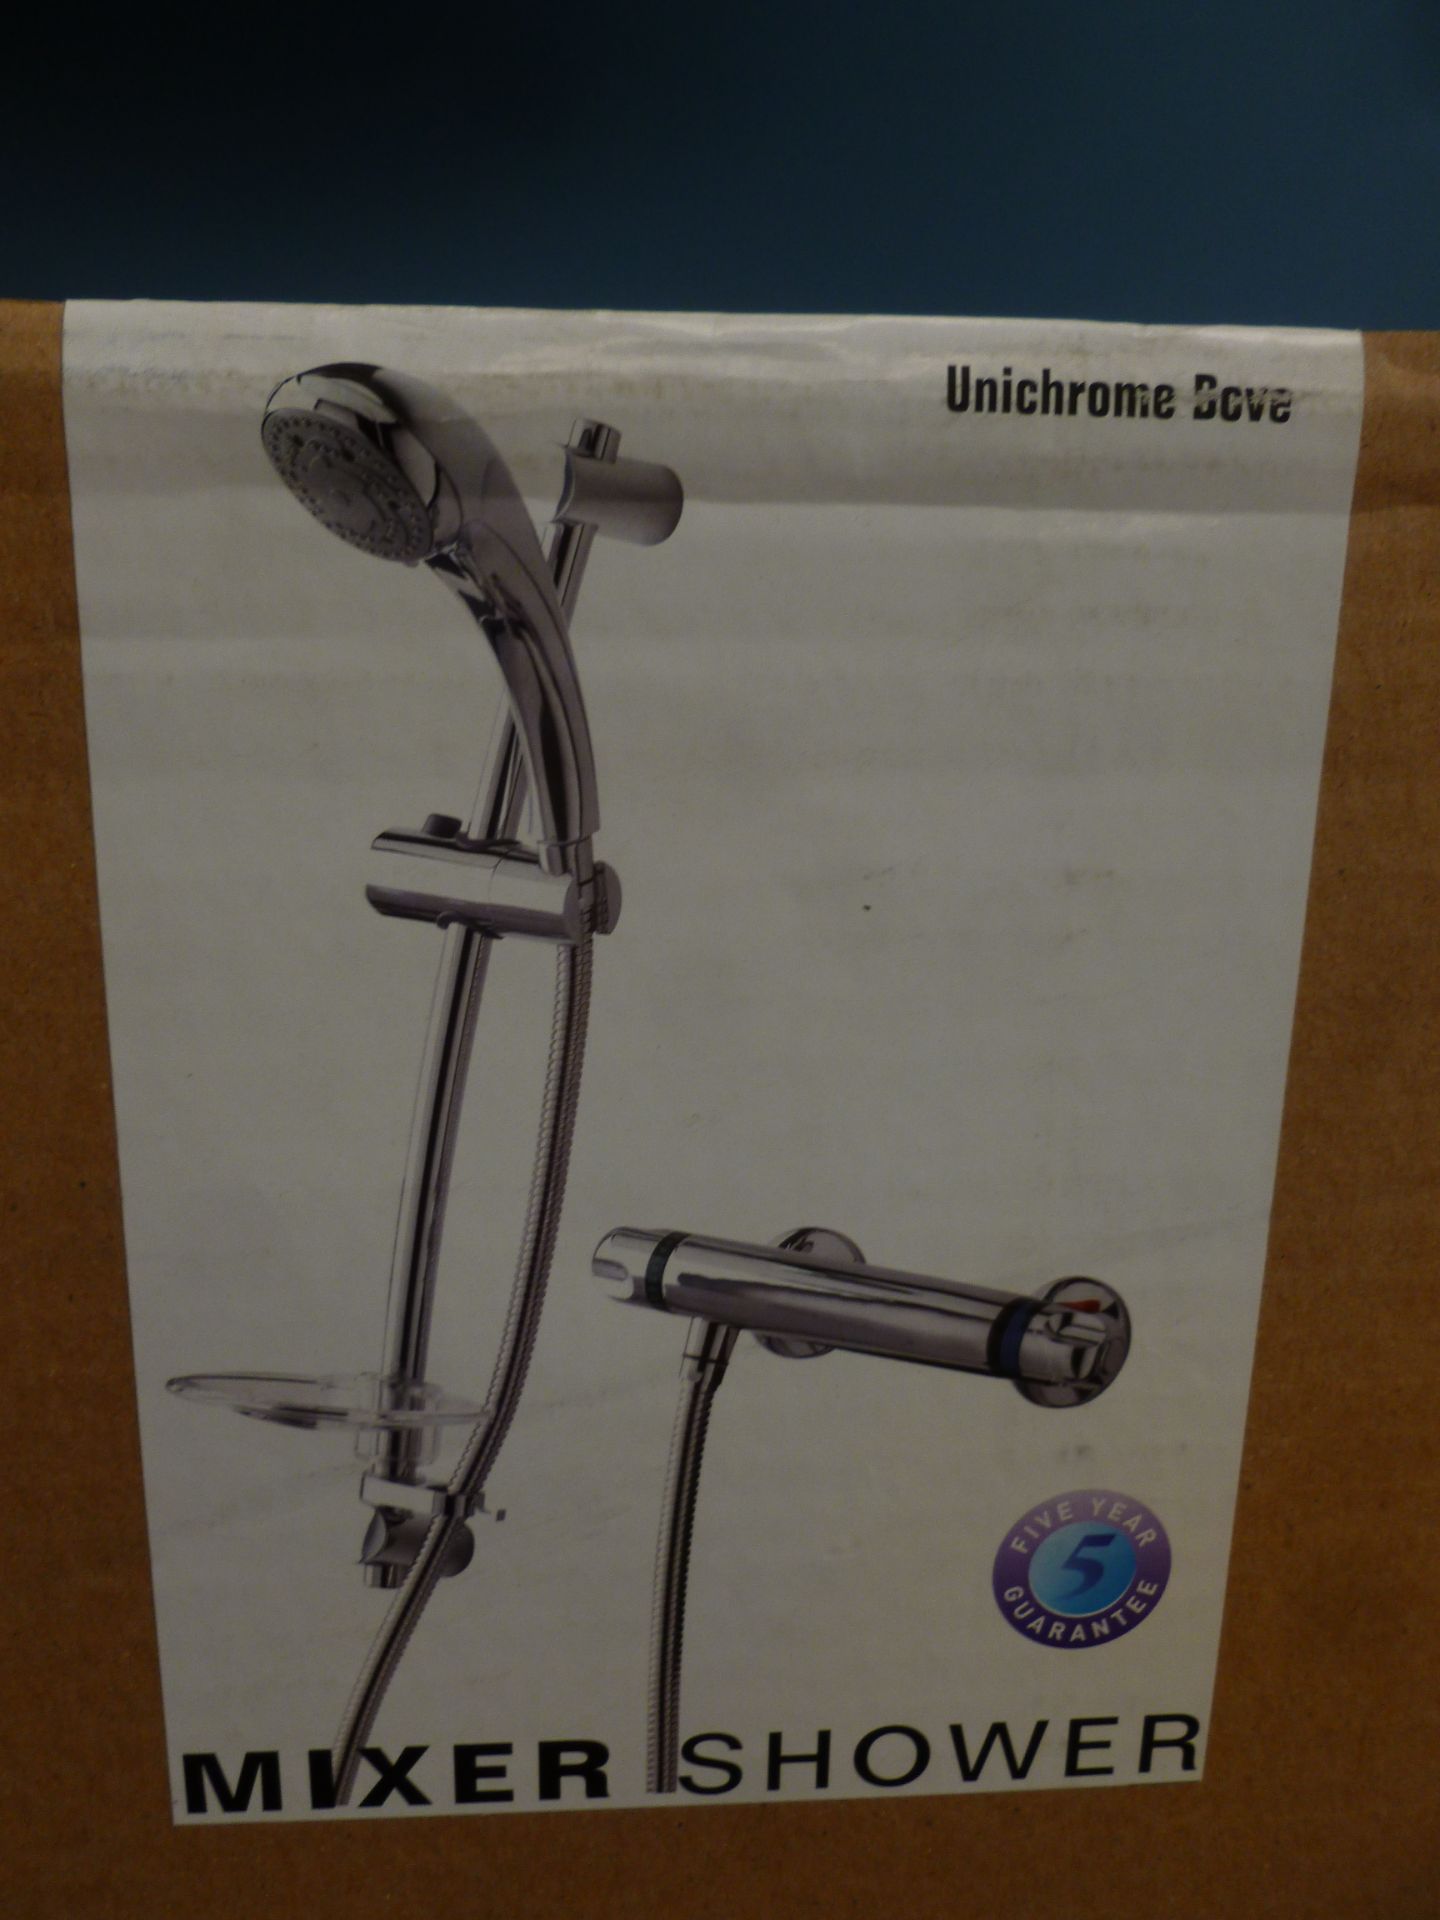 Triton Unichrome Dove Thermostaic Bar Mixer Shower. New, sealed and boxed.